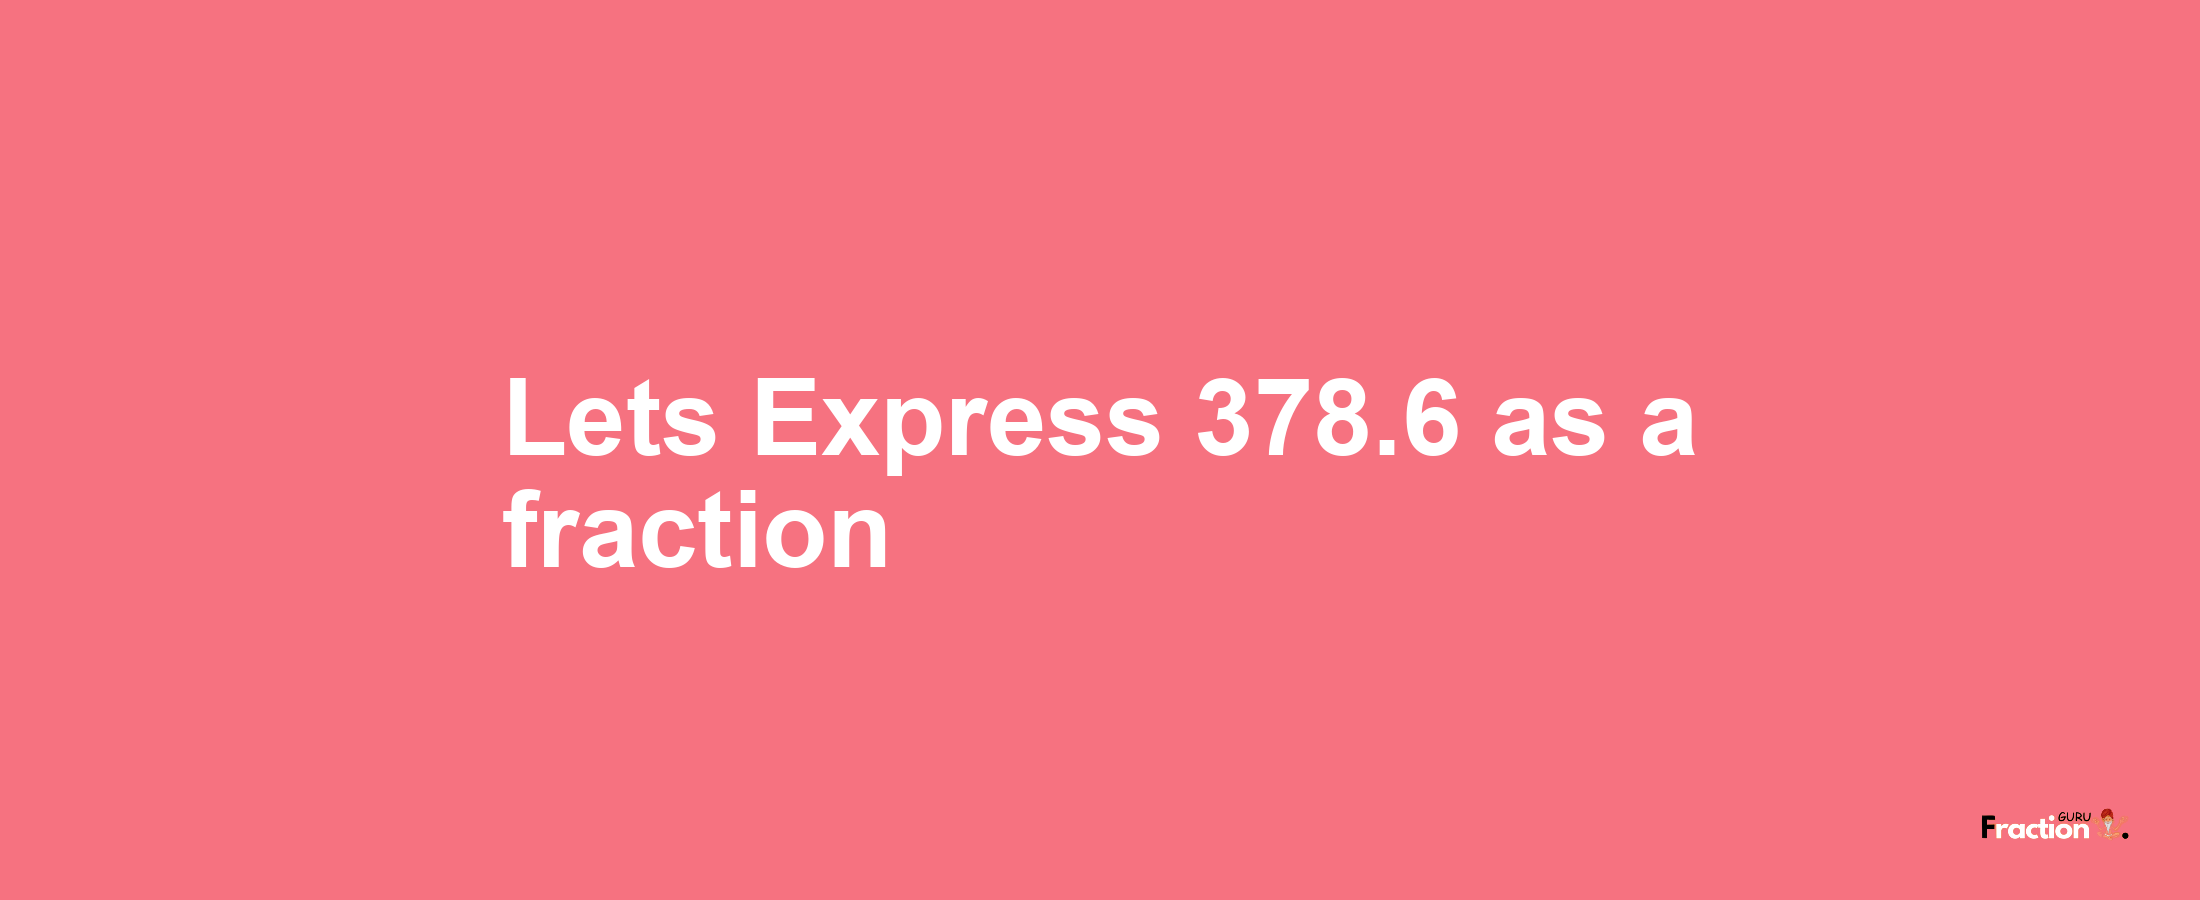 Lets Express 378.6 as afraction